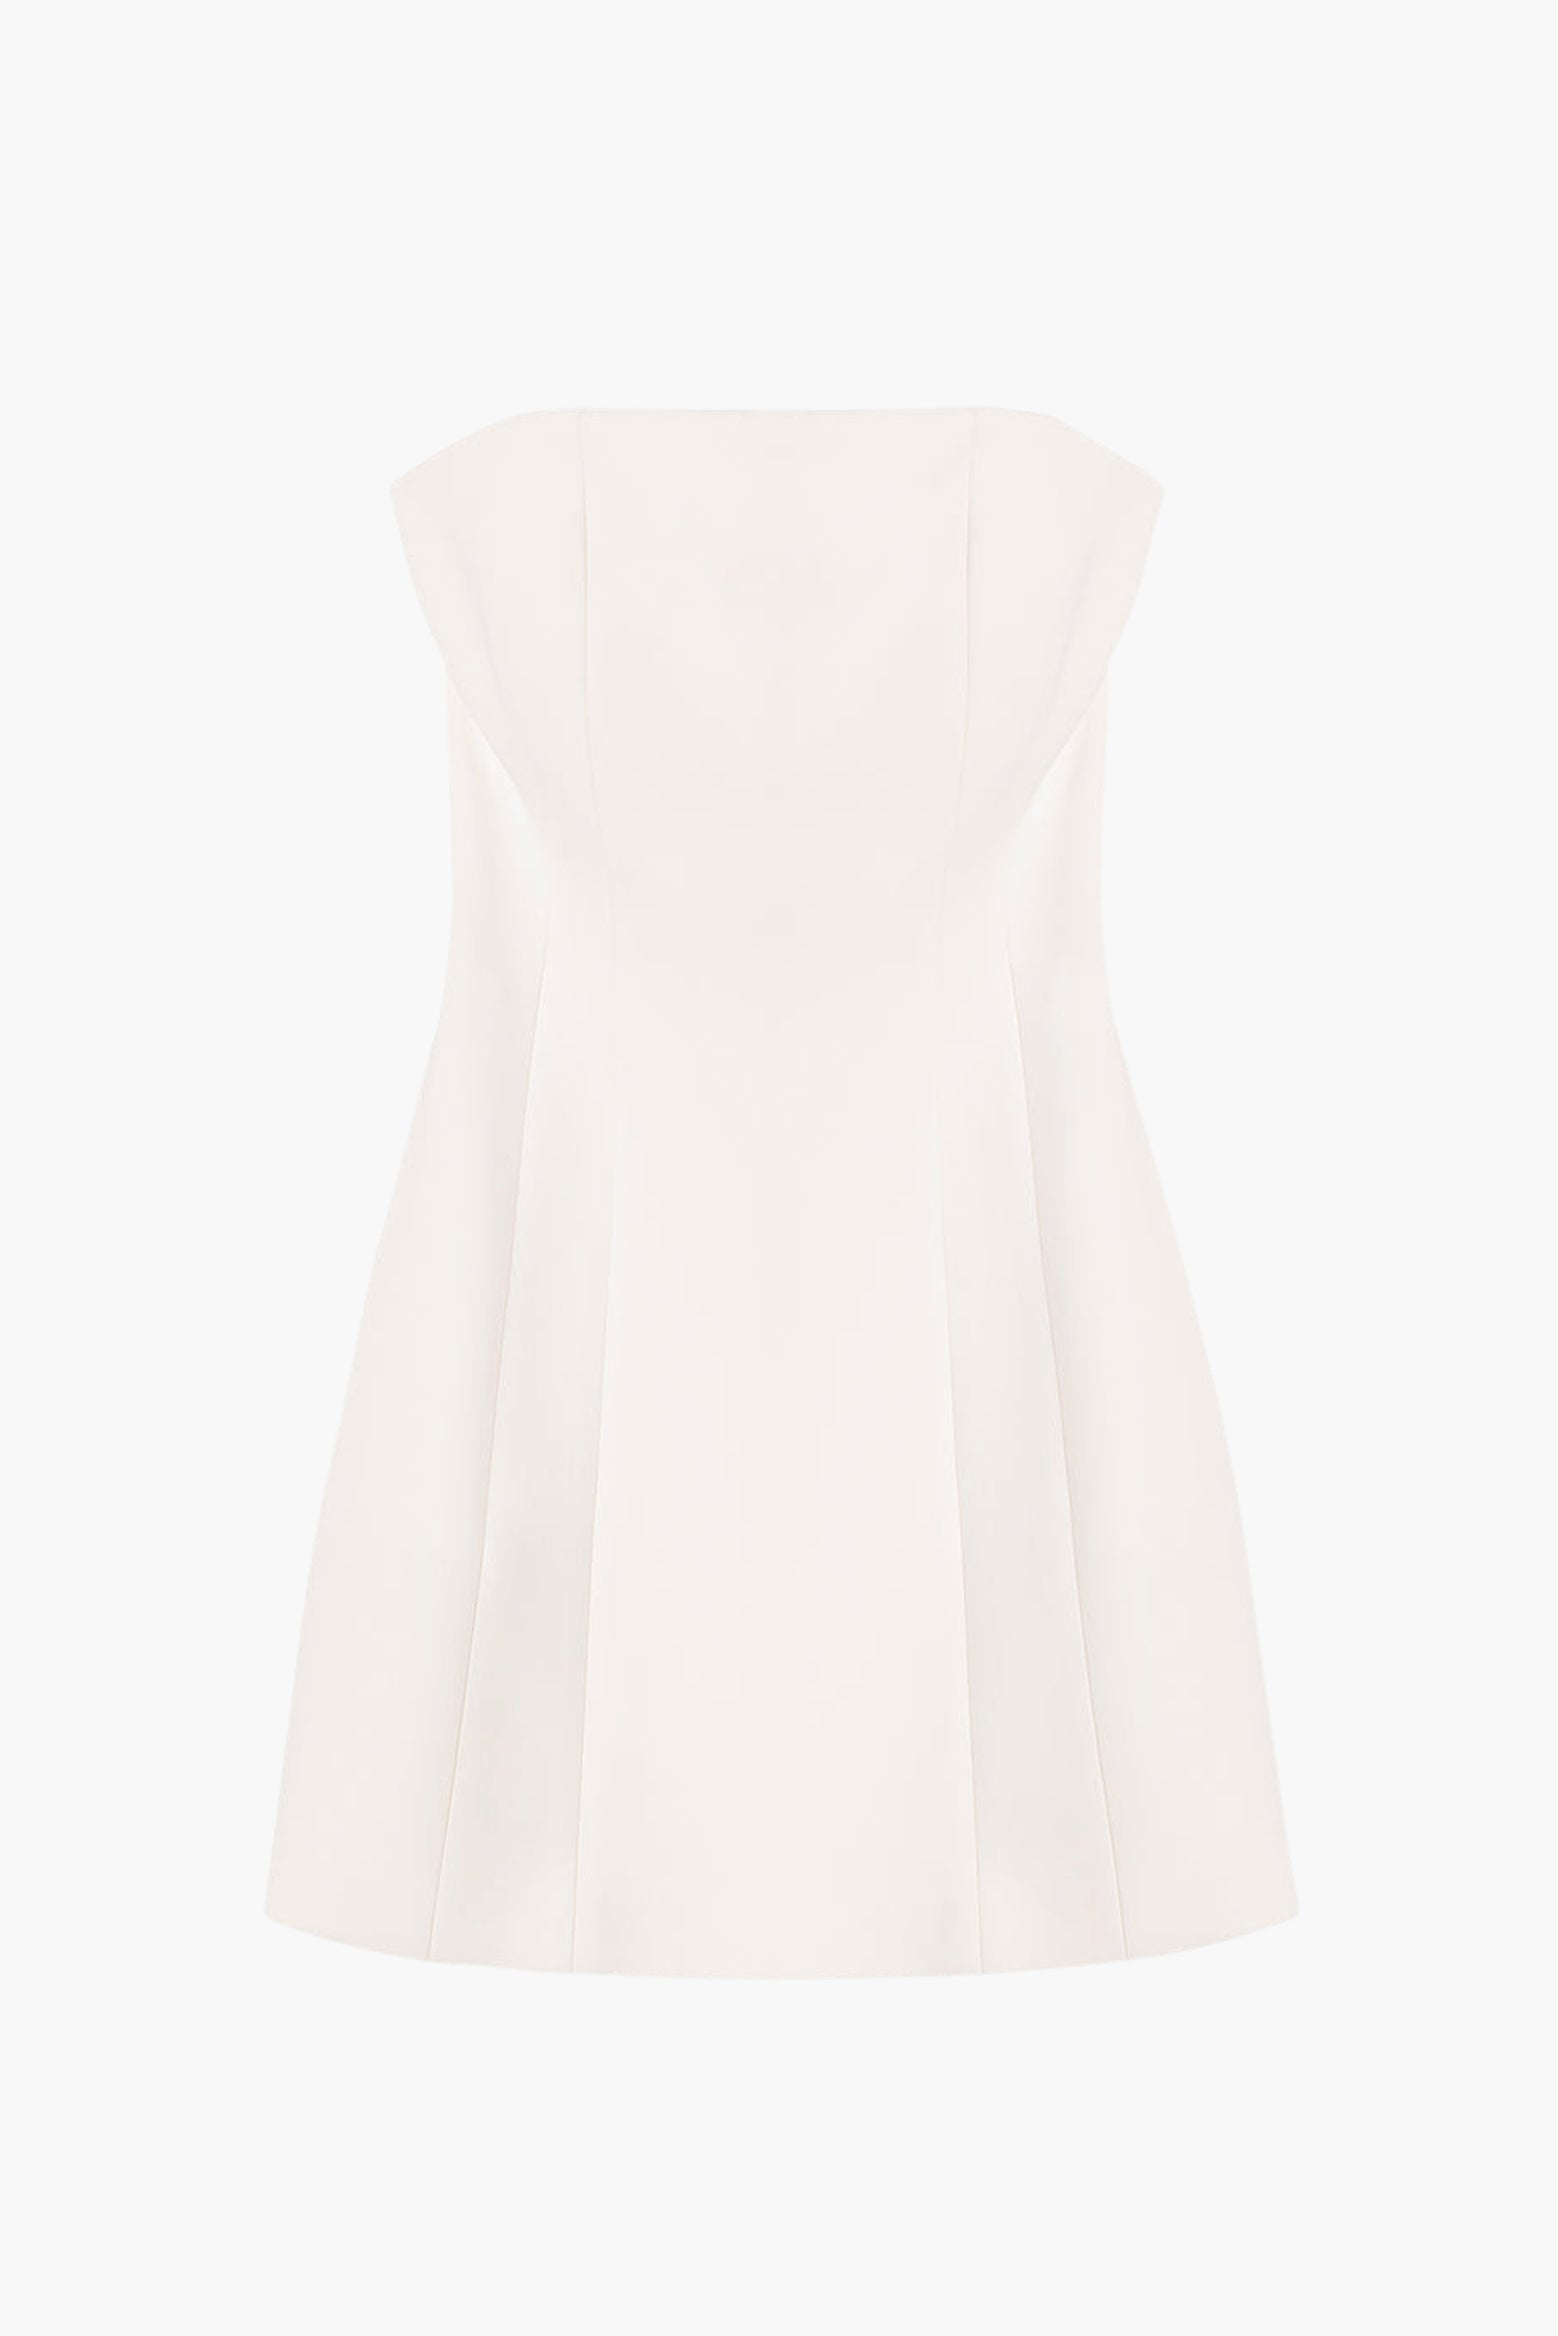 ALC Elsie Dress in White from The New Trend